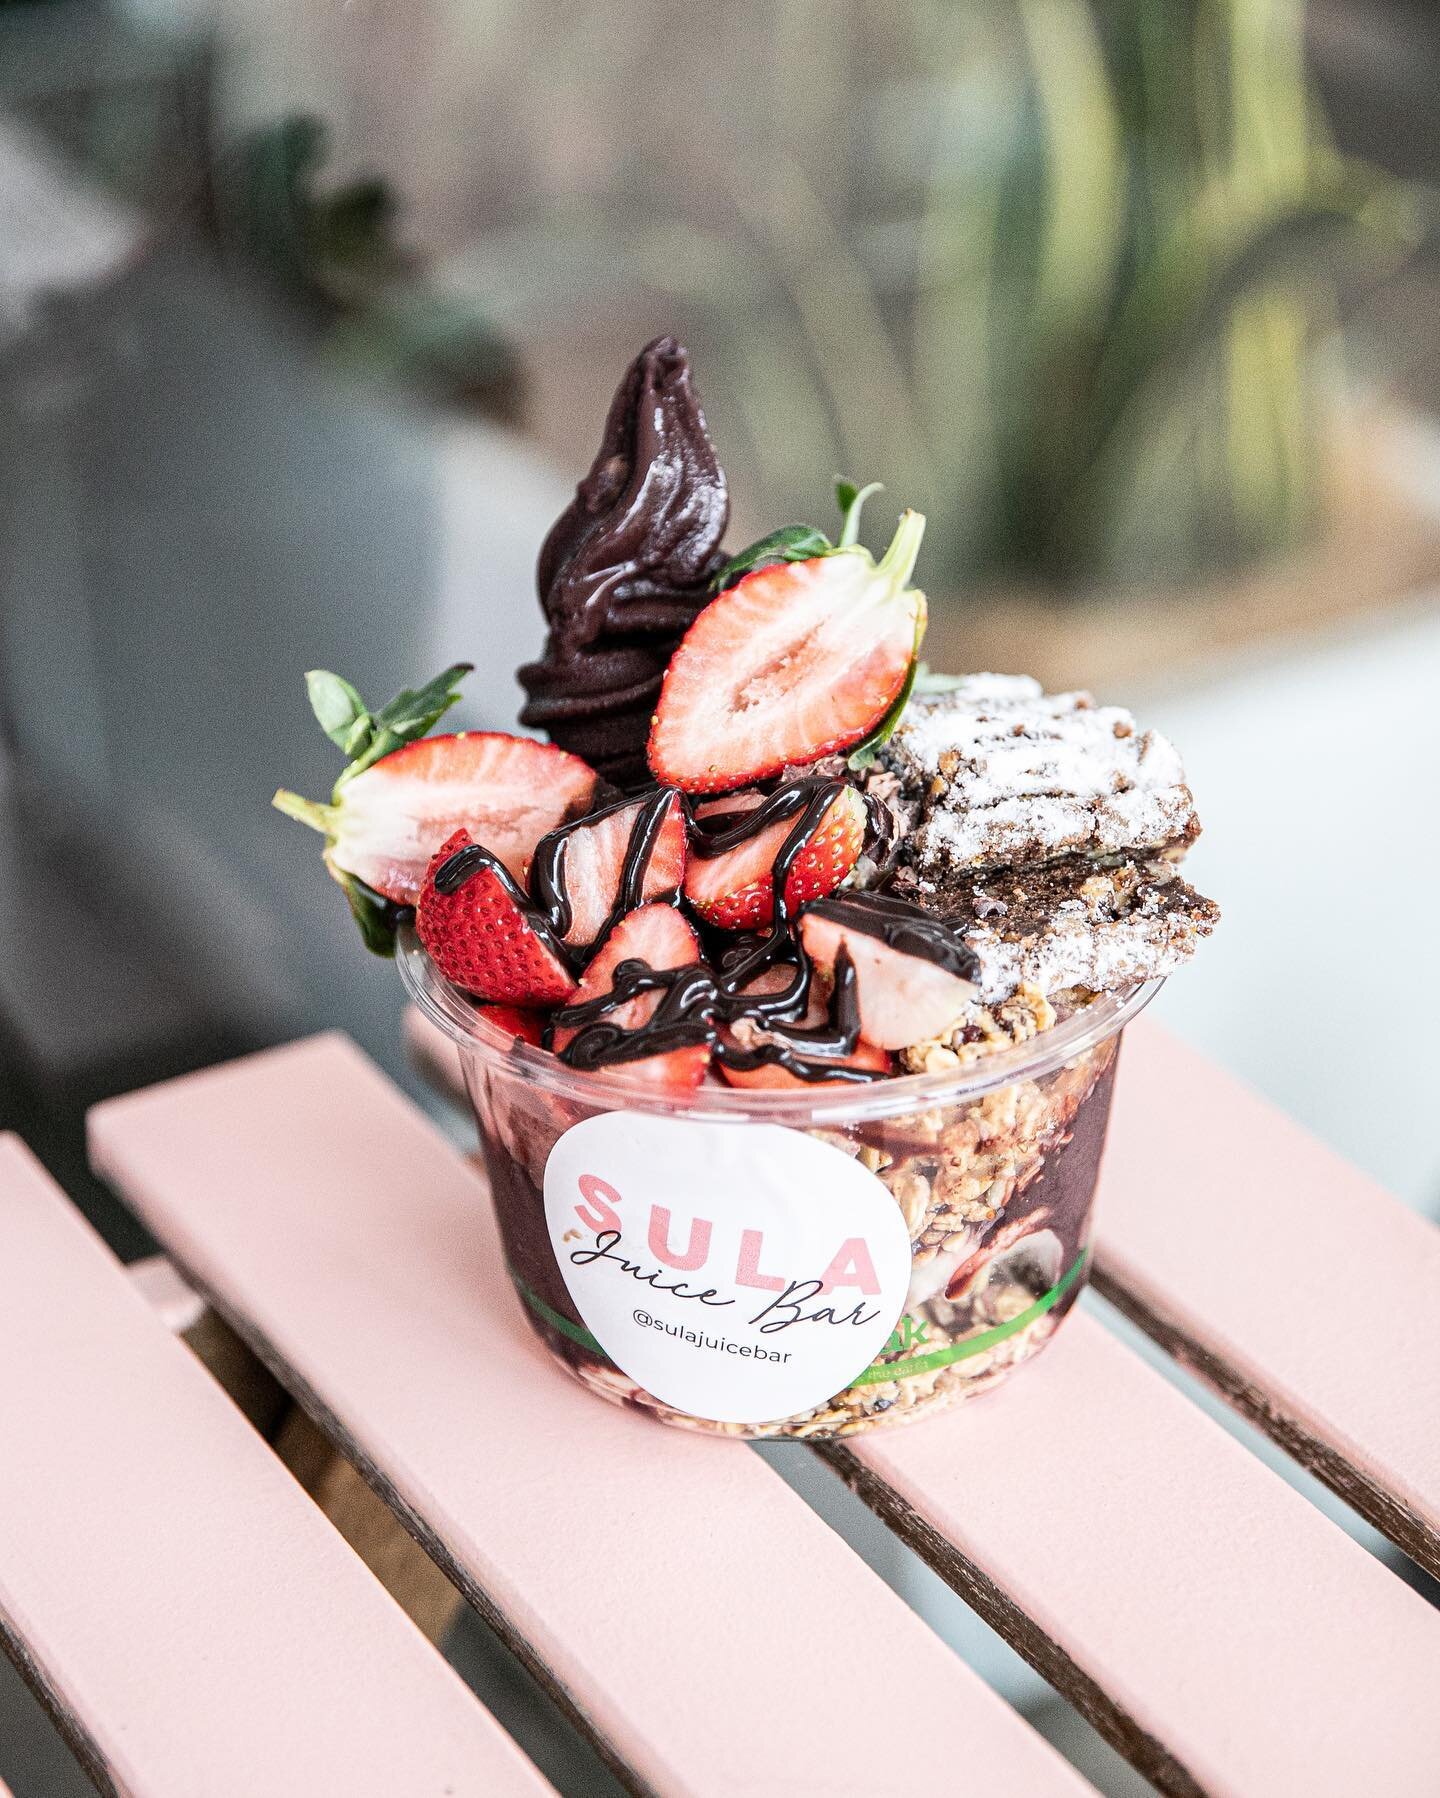 The cold weather shouldn&rsquo;t stop the craving of our a&ccedil;ai bowls 🤤🤤
______
Come and create your own delicious bowl with our &lsquo;build your own&rsquo; a&ccedil;ai bowls!